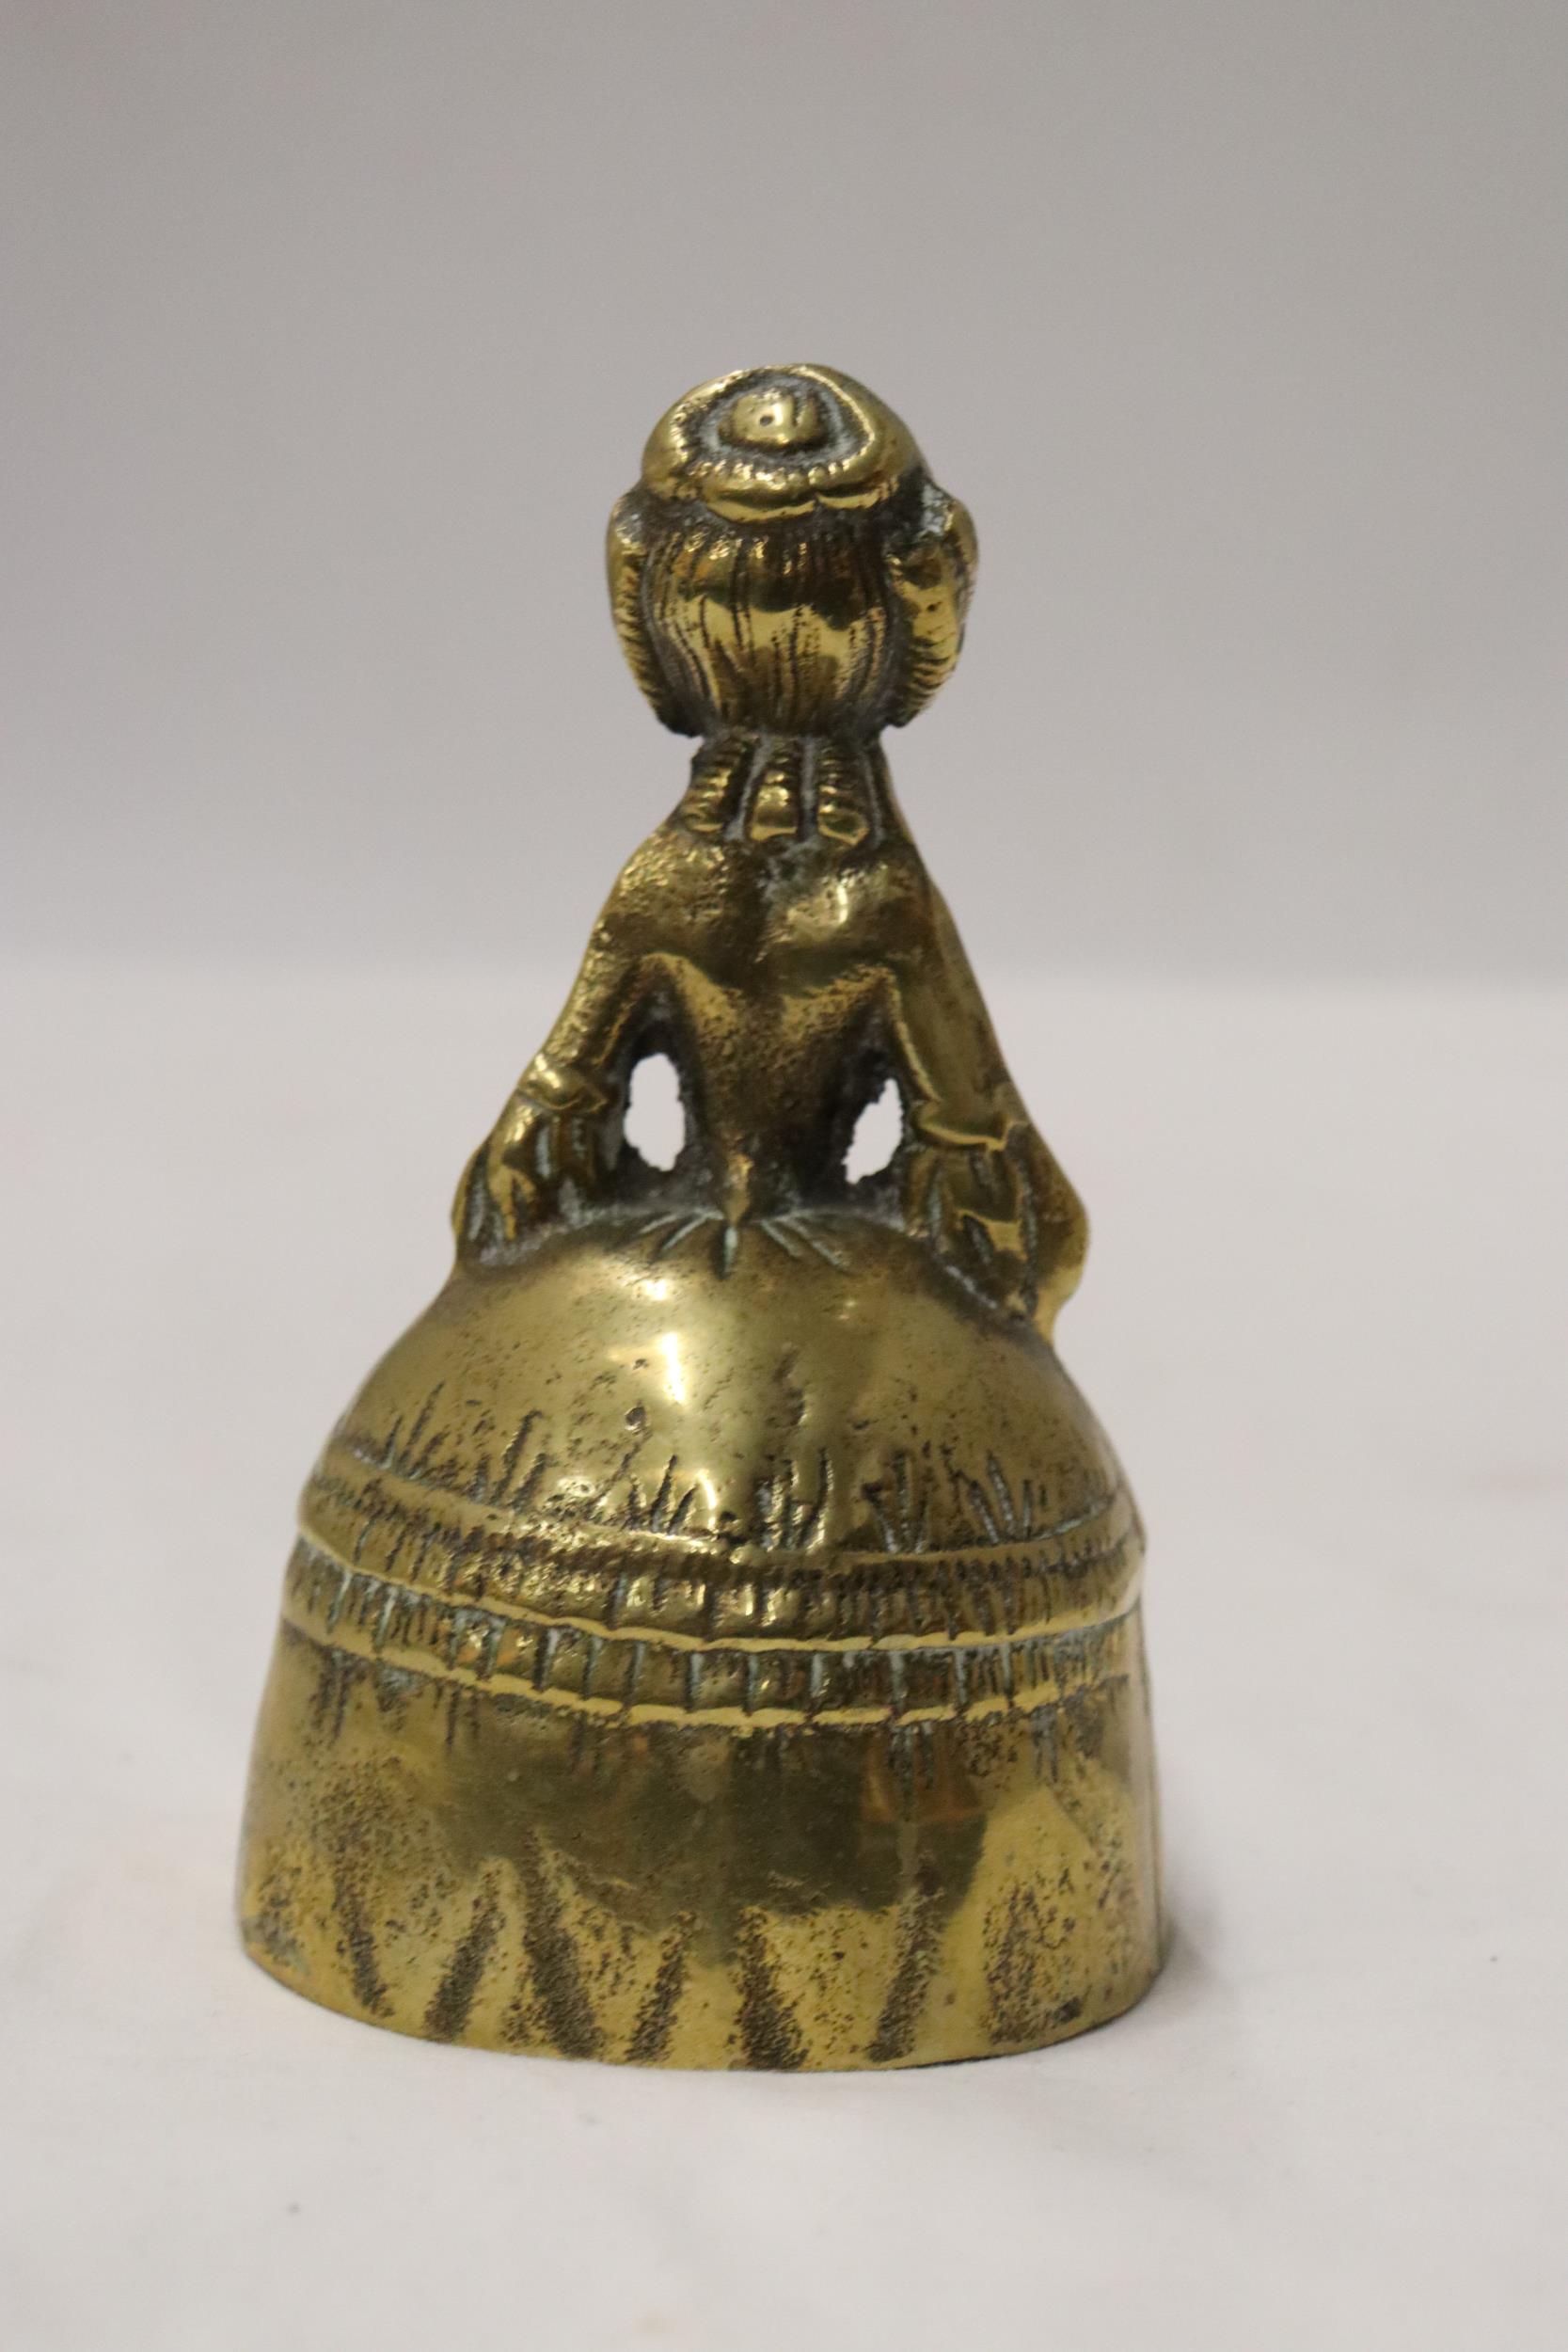 A VINTAGE BRASS BELL MODELLED AS A VICTORIAN WOMAN - Image 4 of 6